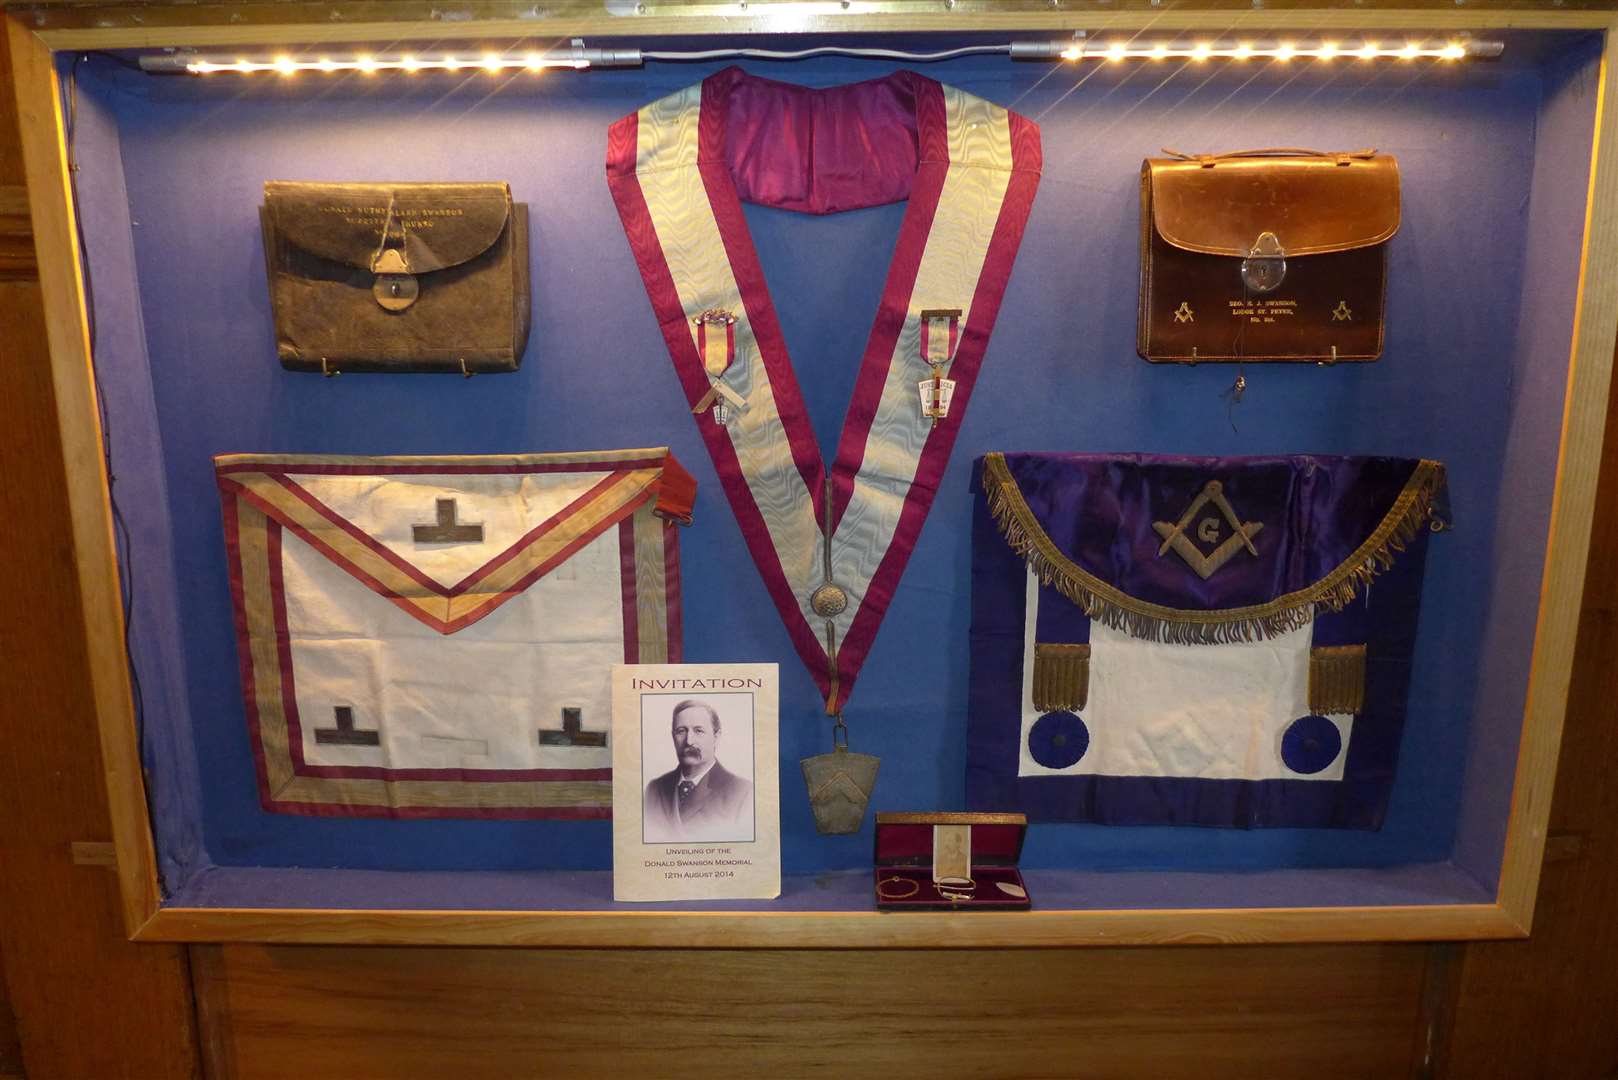 On display in St Peter's Operative Lodge is the regalia worn by Donald Swanson, who was born at Geise Distillery in August 1848 and moved to Thurso in 1850. A member of the lodge, he became an officer in the Metropolitan Police in London and was at one point in charge of the Jack the Ripper investigation. A memorial to him was placed outside Thurso Police Station in August 2014. Picture: Willie Mackay